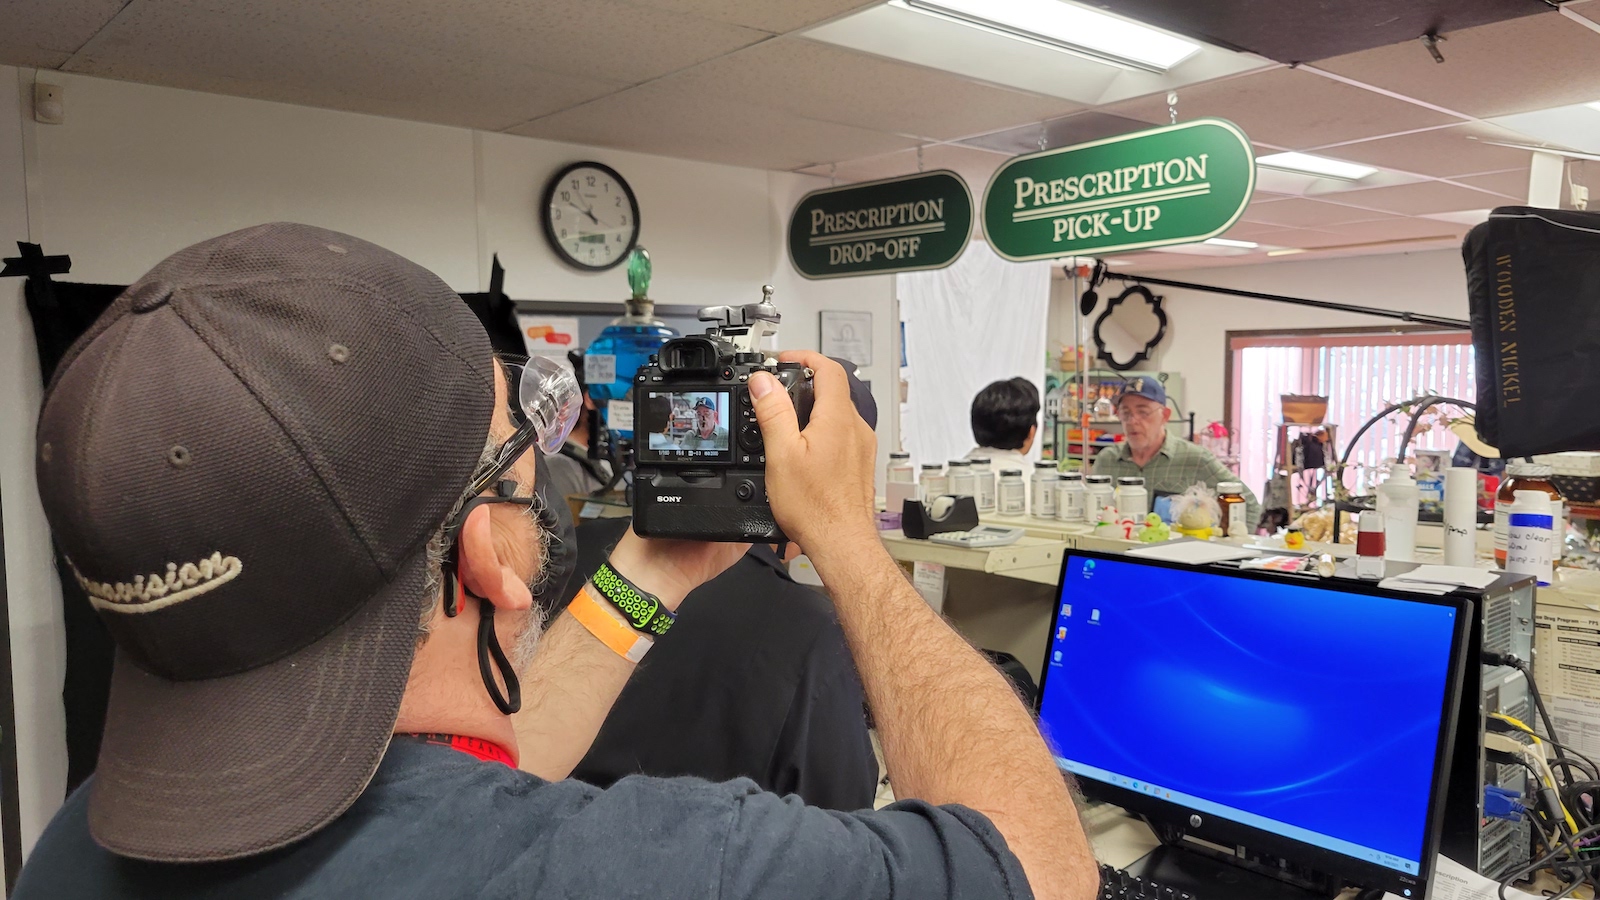 Behind-the-scenes look at Oscar winning actor J.K. Simmons filming a scene in on location in Wauconda Pharmacy.